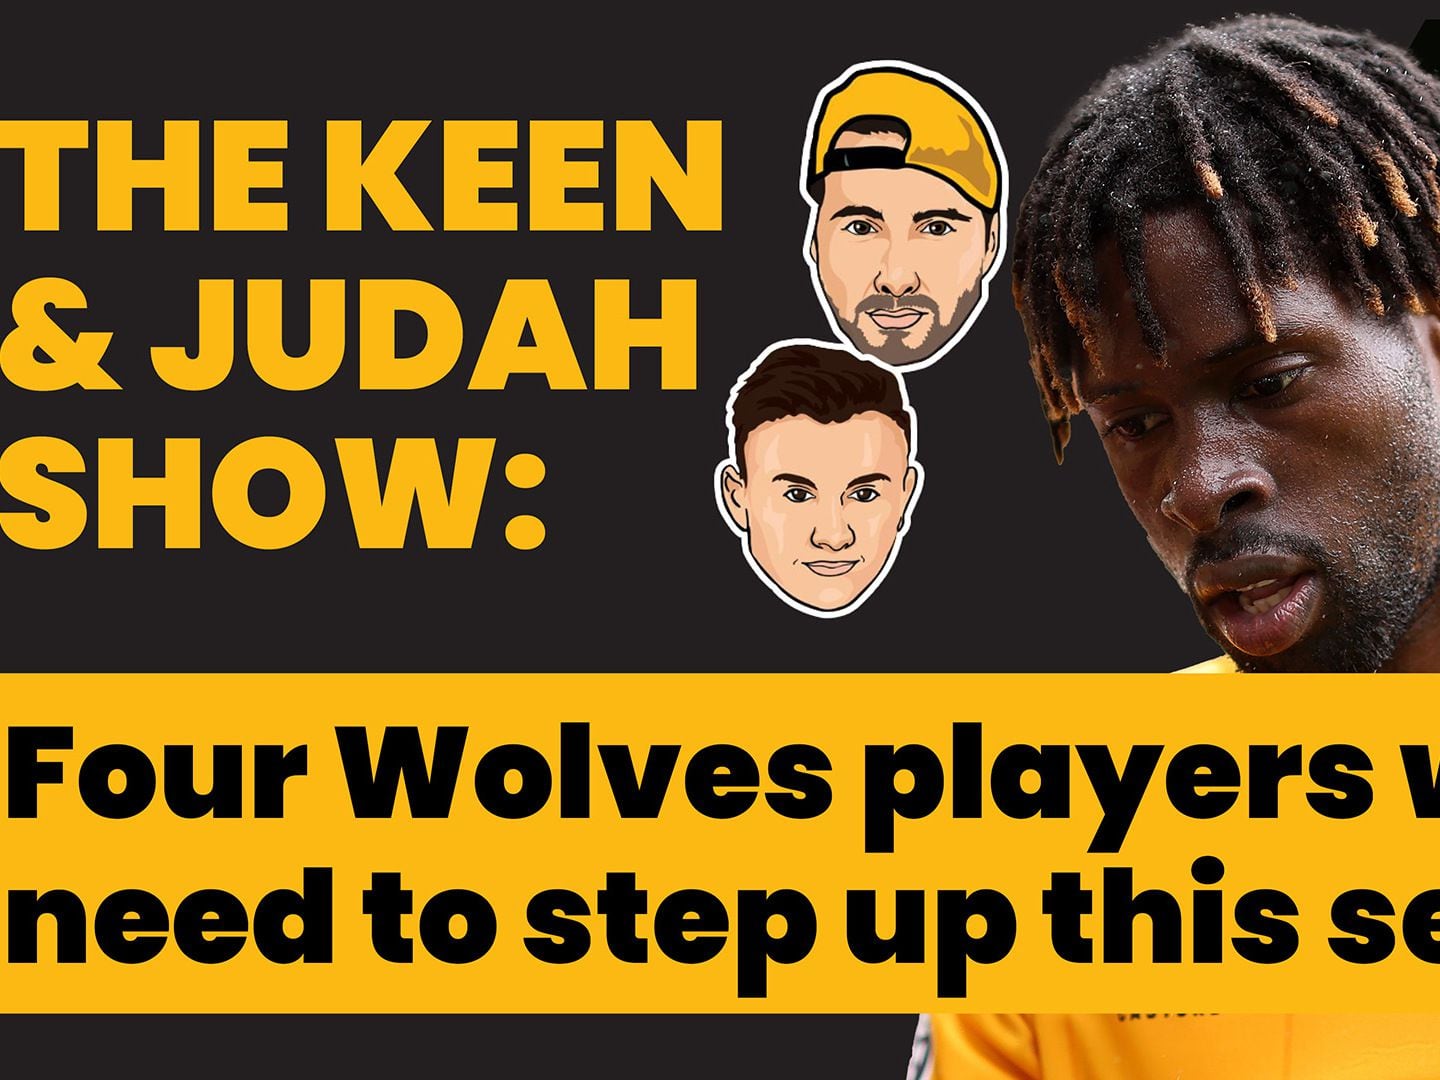 FREE TO WATCH: Four Wolves players who need to step up this season